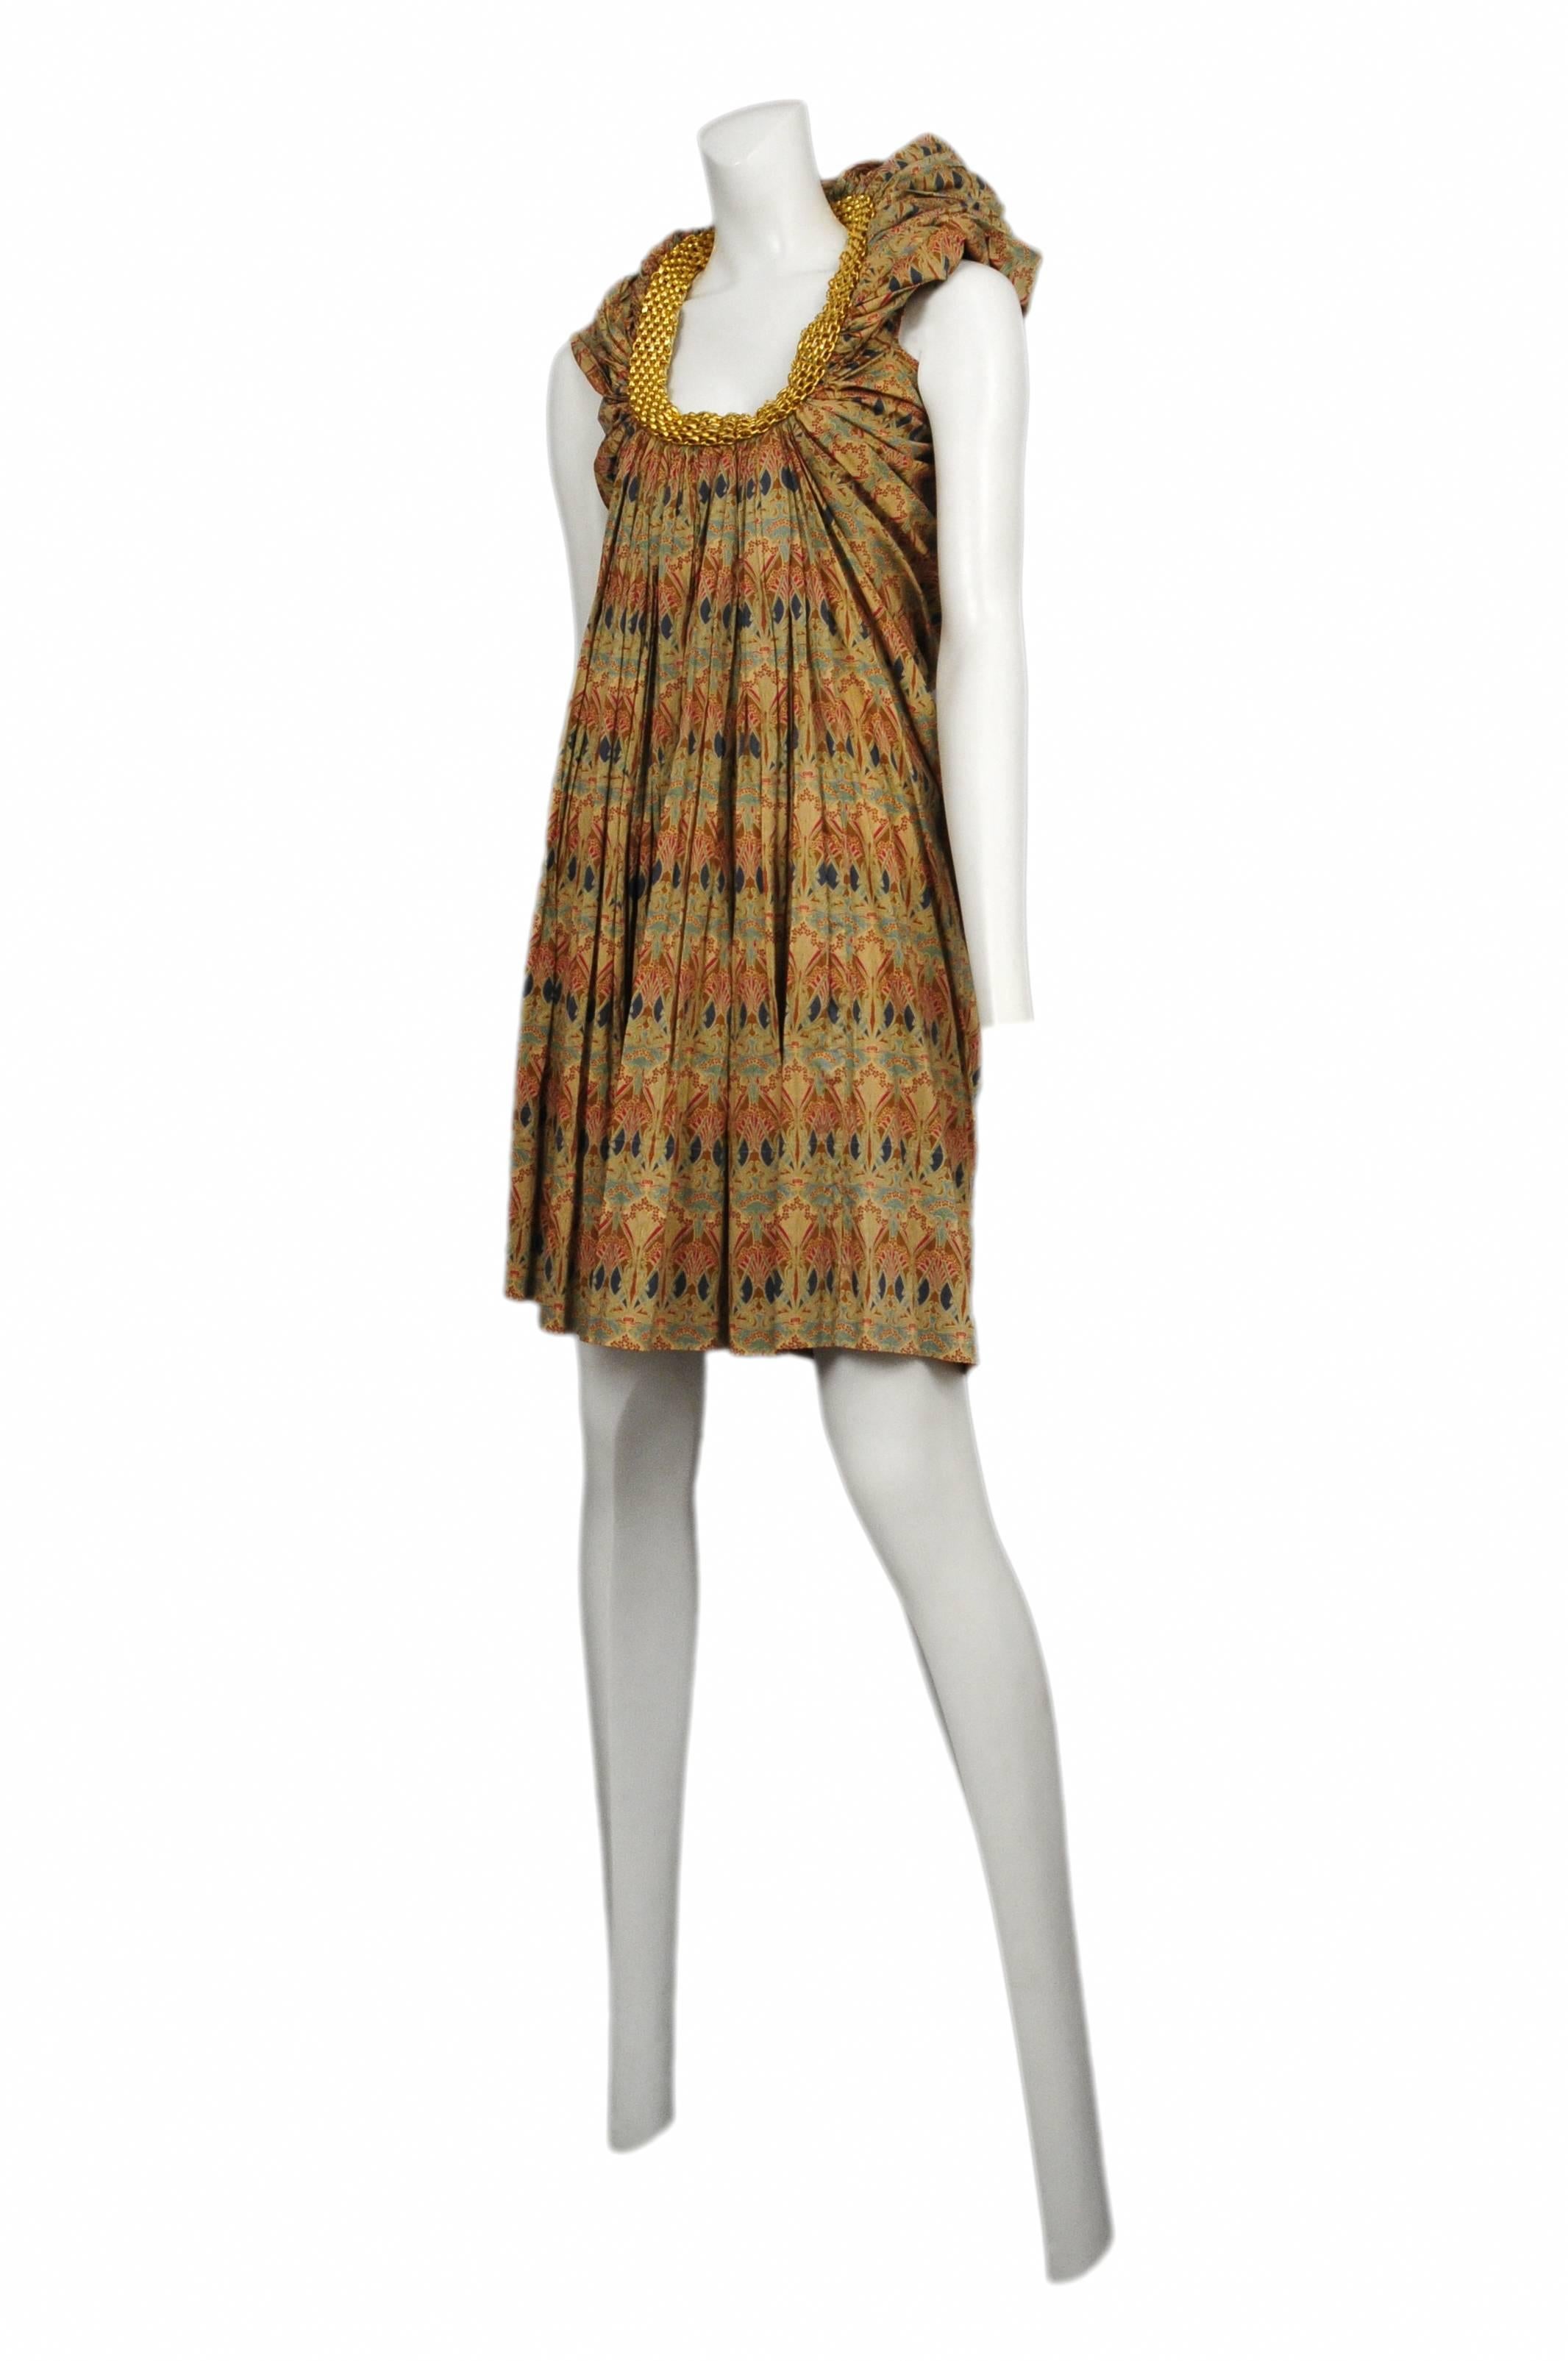 Vintage Junya Watanabe gold printed, sleeveless, knee length dress featuring a gold chain encircling the collar. Circa 2007.
Please inquire for additional images.